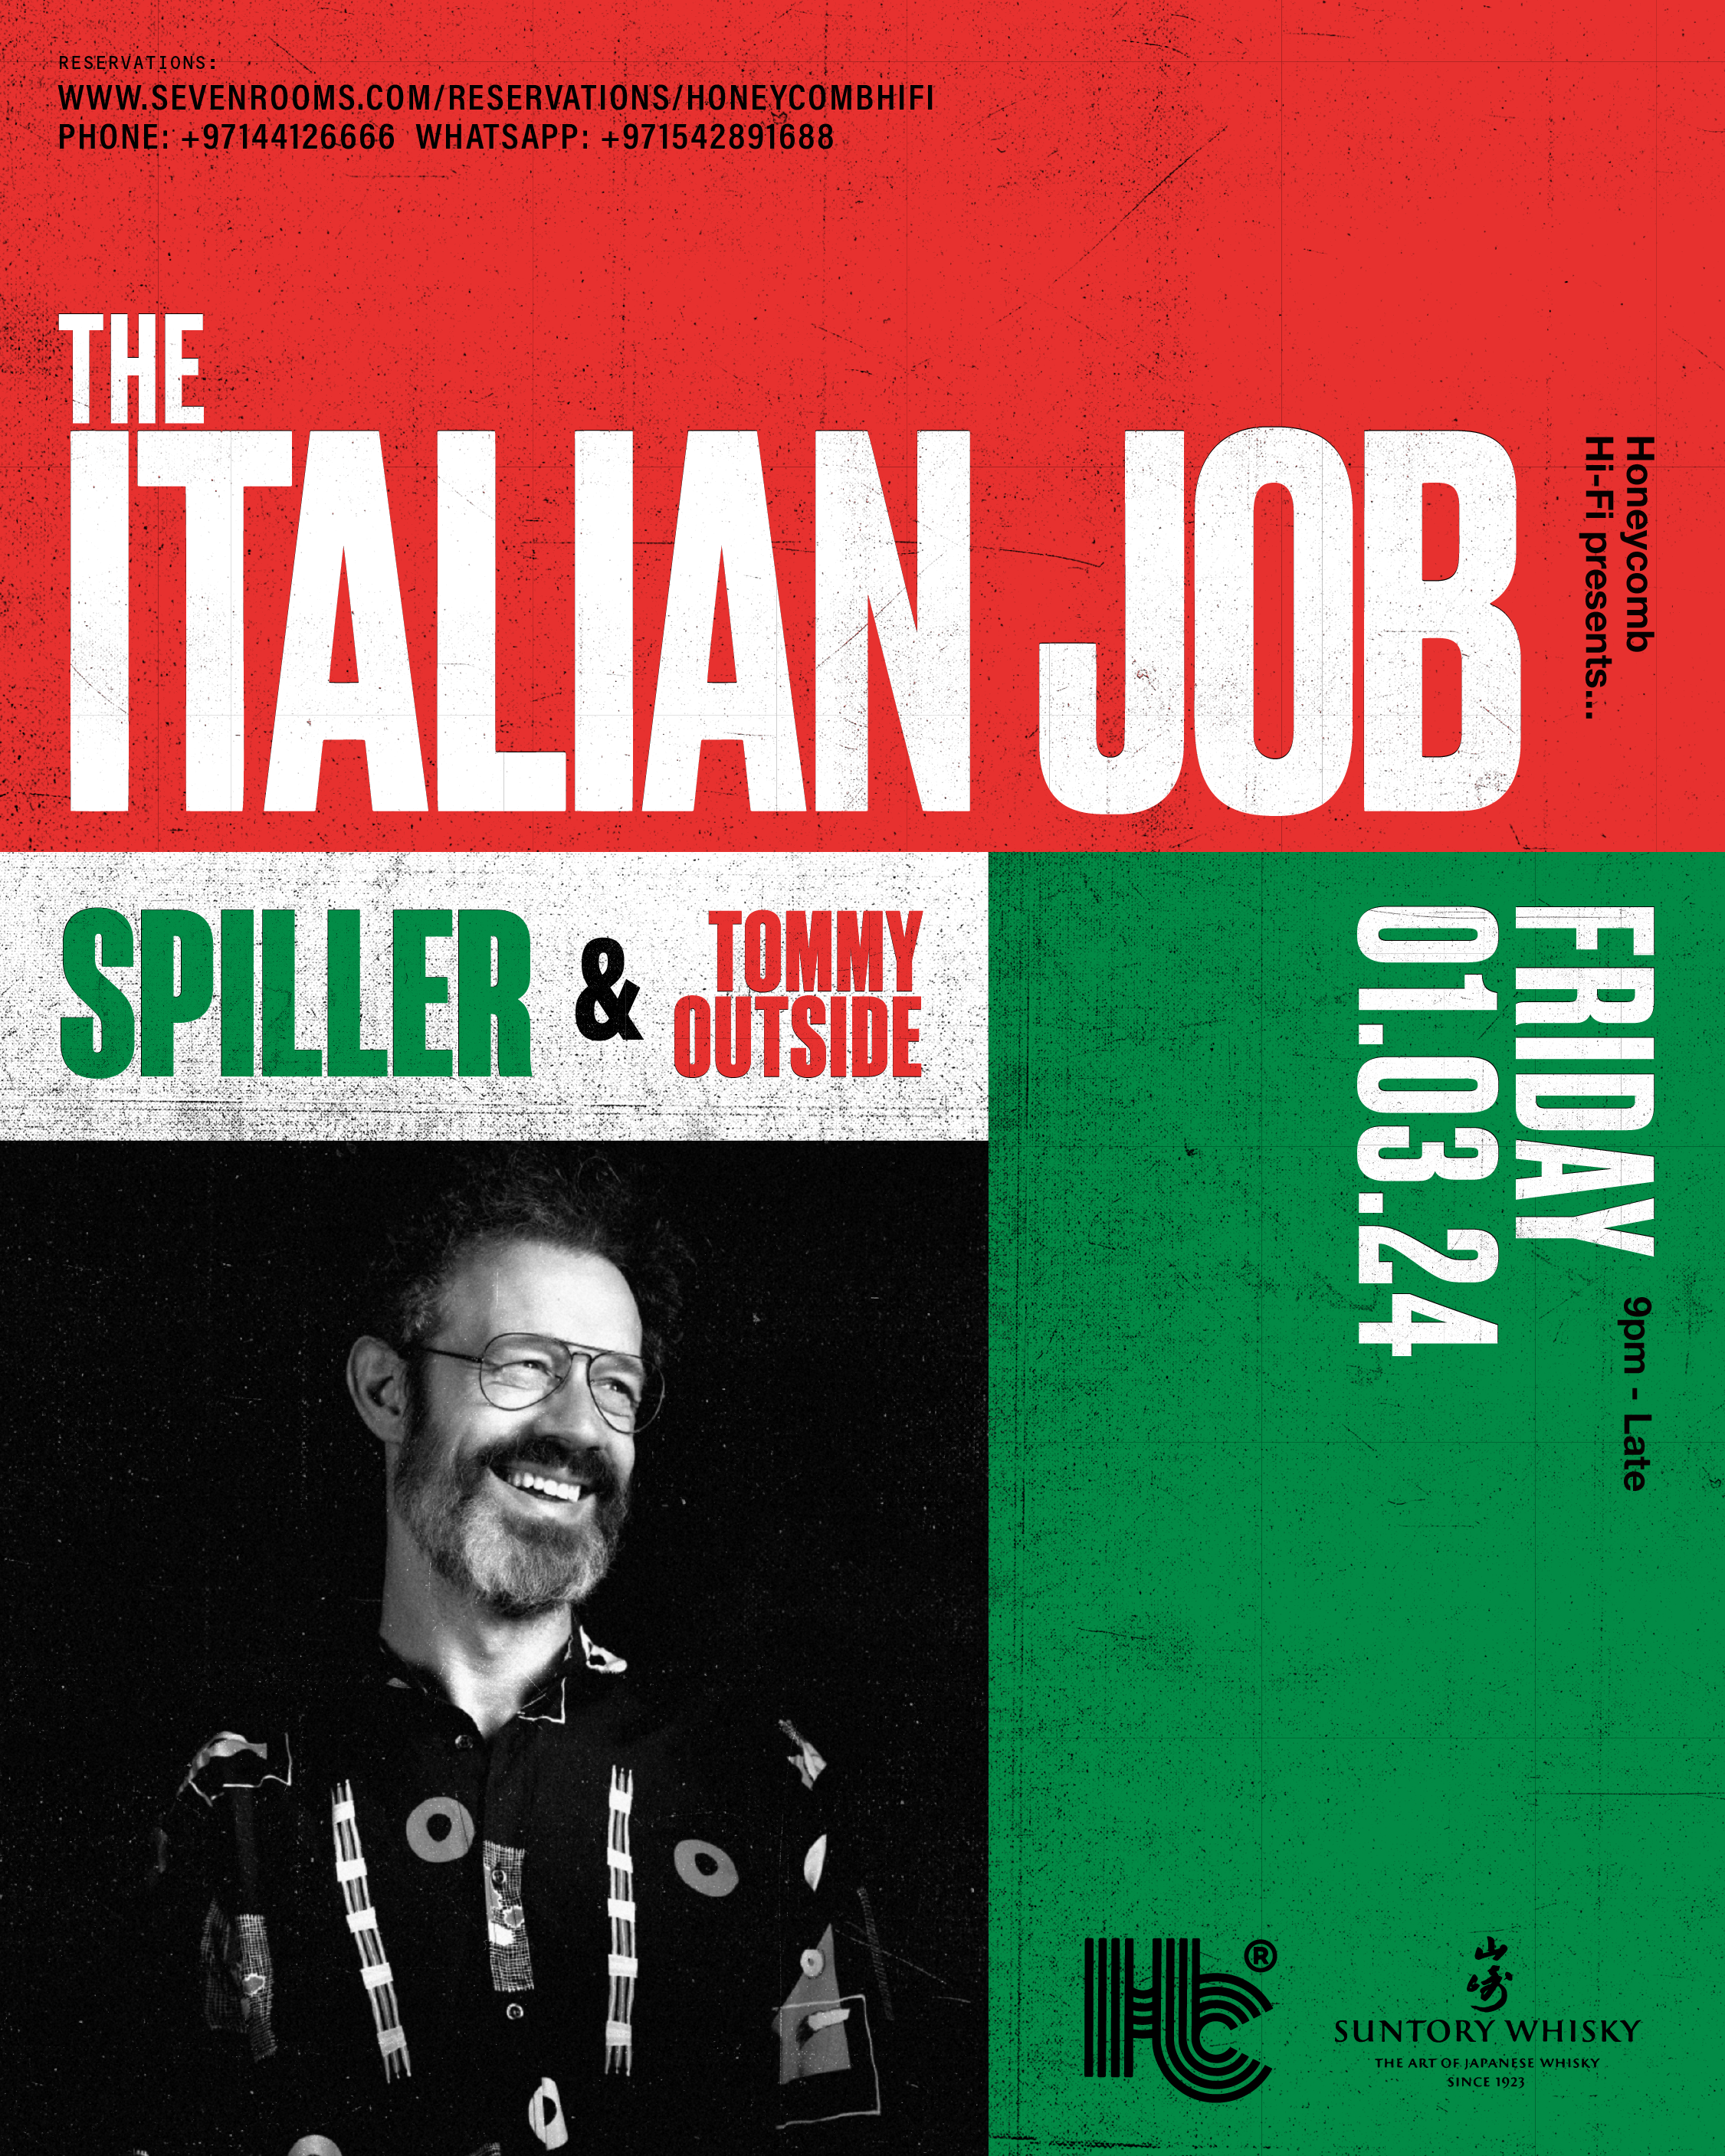 THE ITALIAN JOB Spiller and Tommy Outside - Página frontal